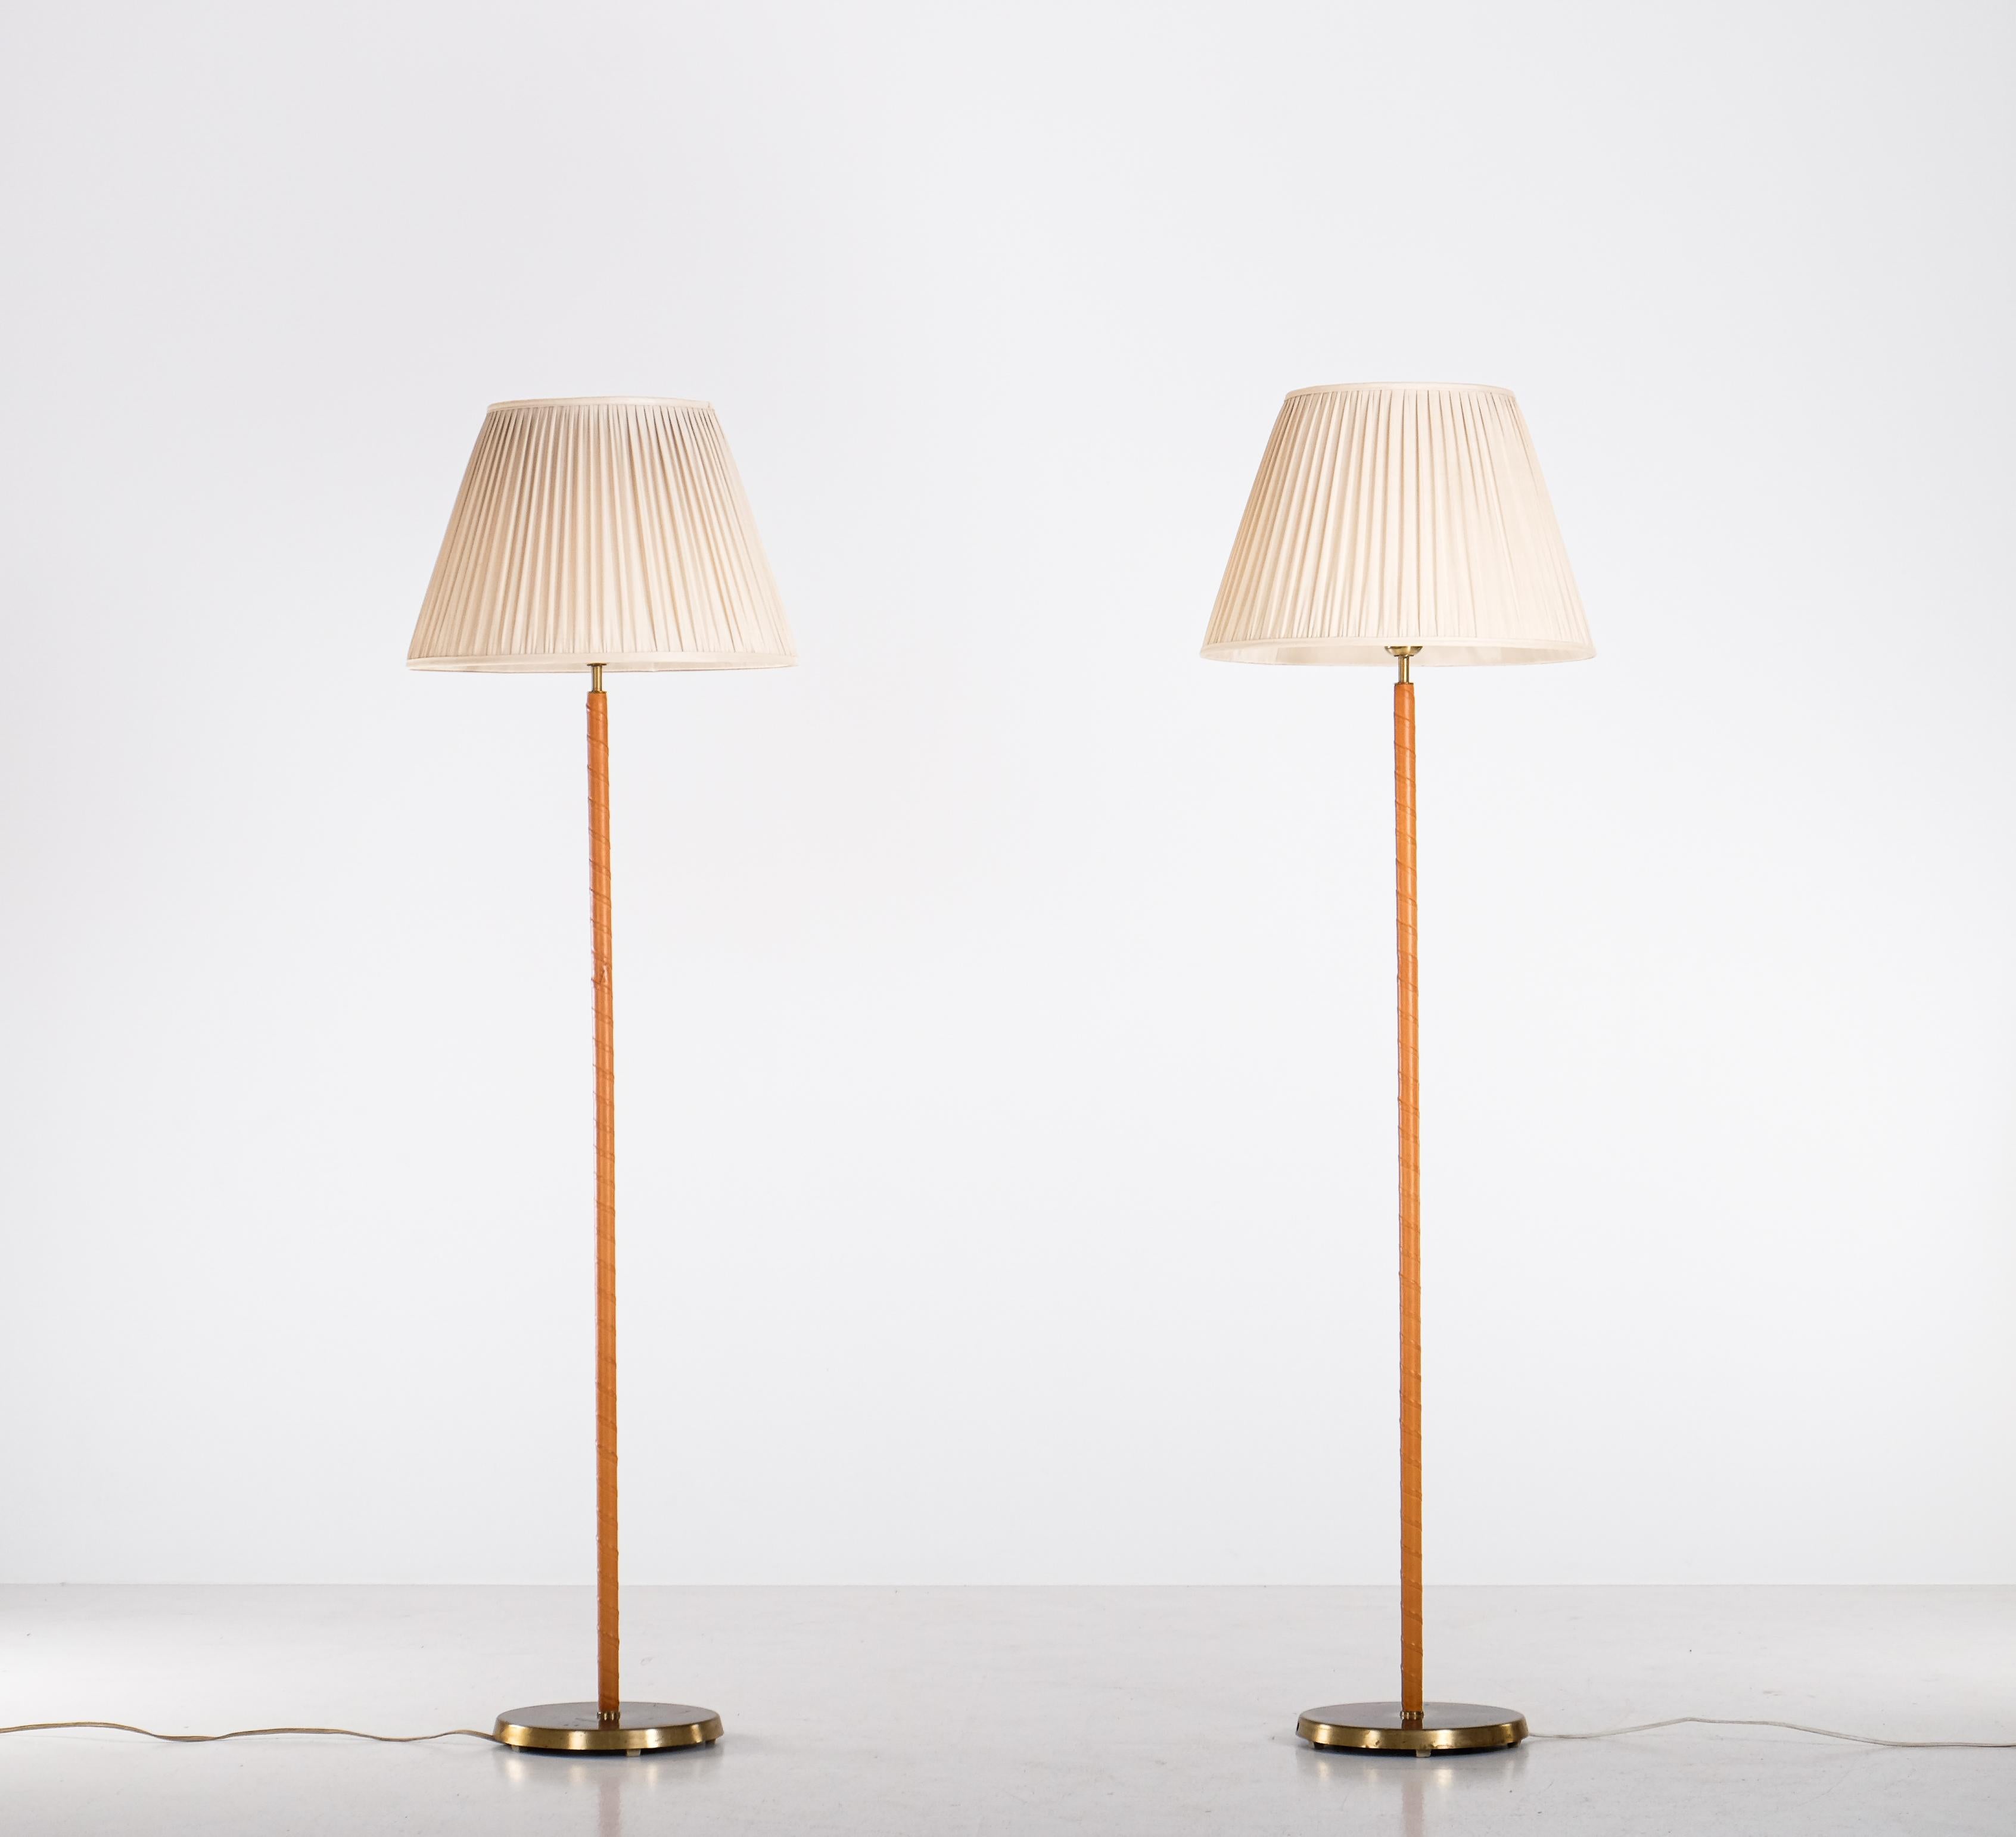 Brass & Leather Floor Lamps, Sweden, 1950s For Sale 3